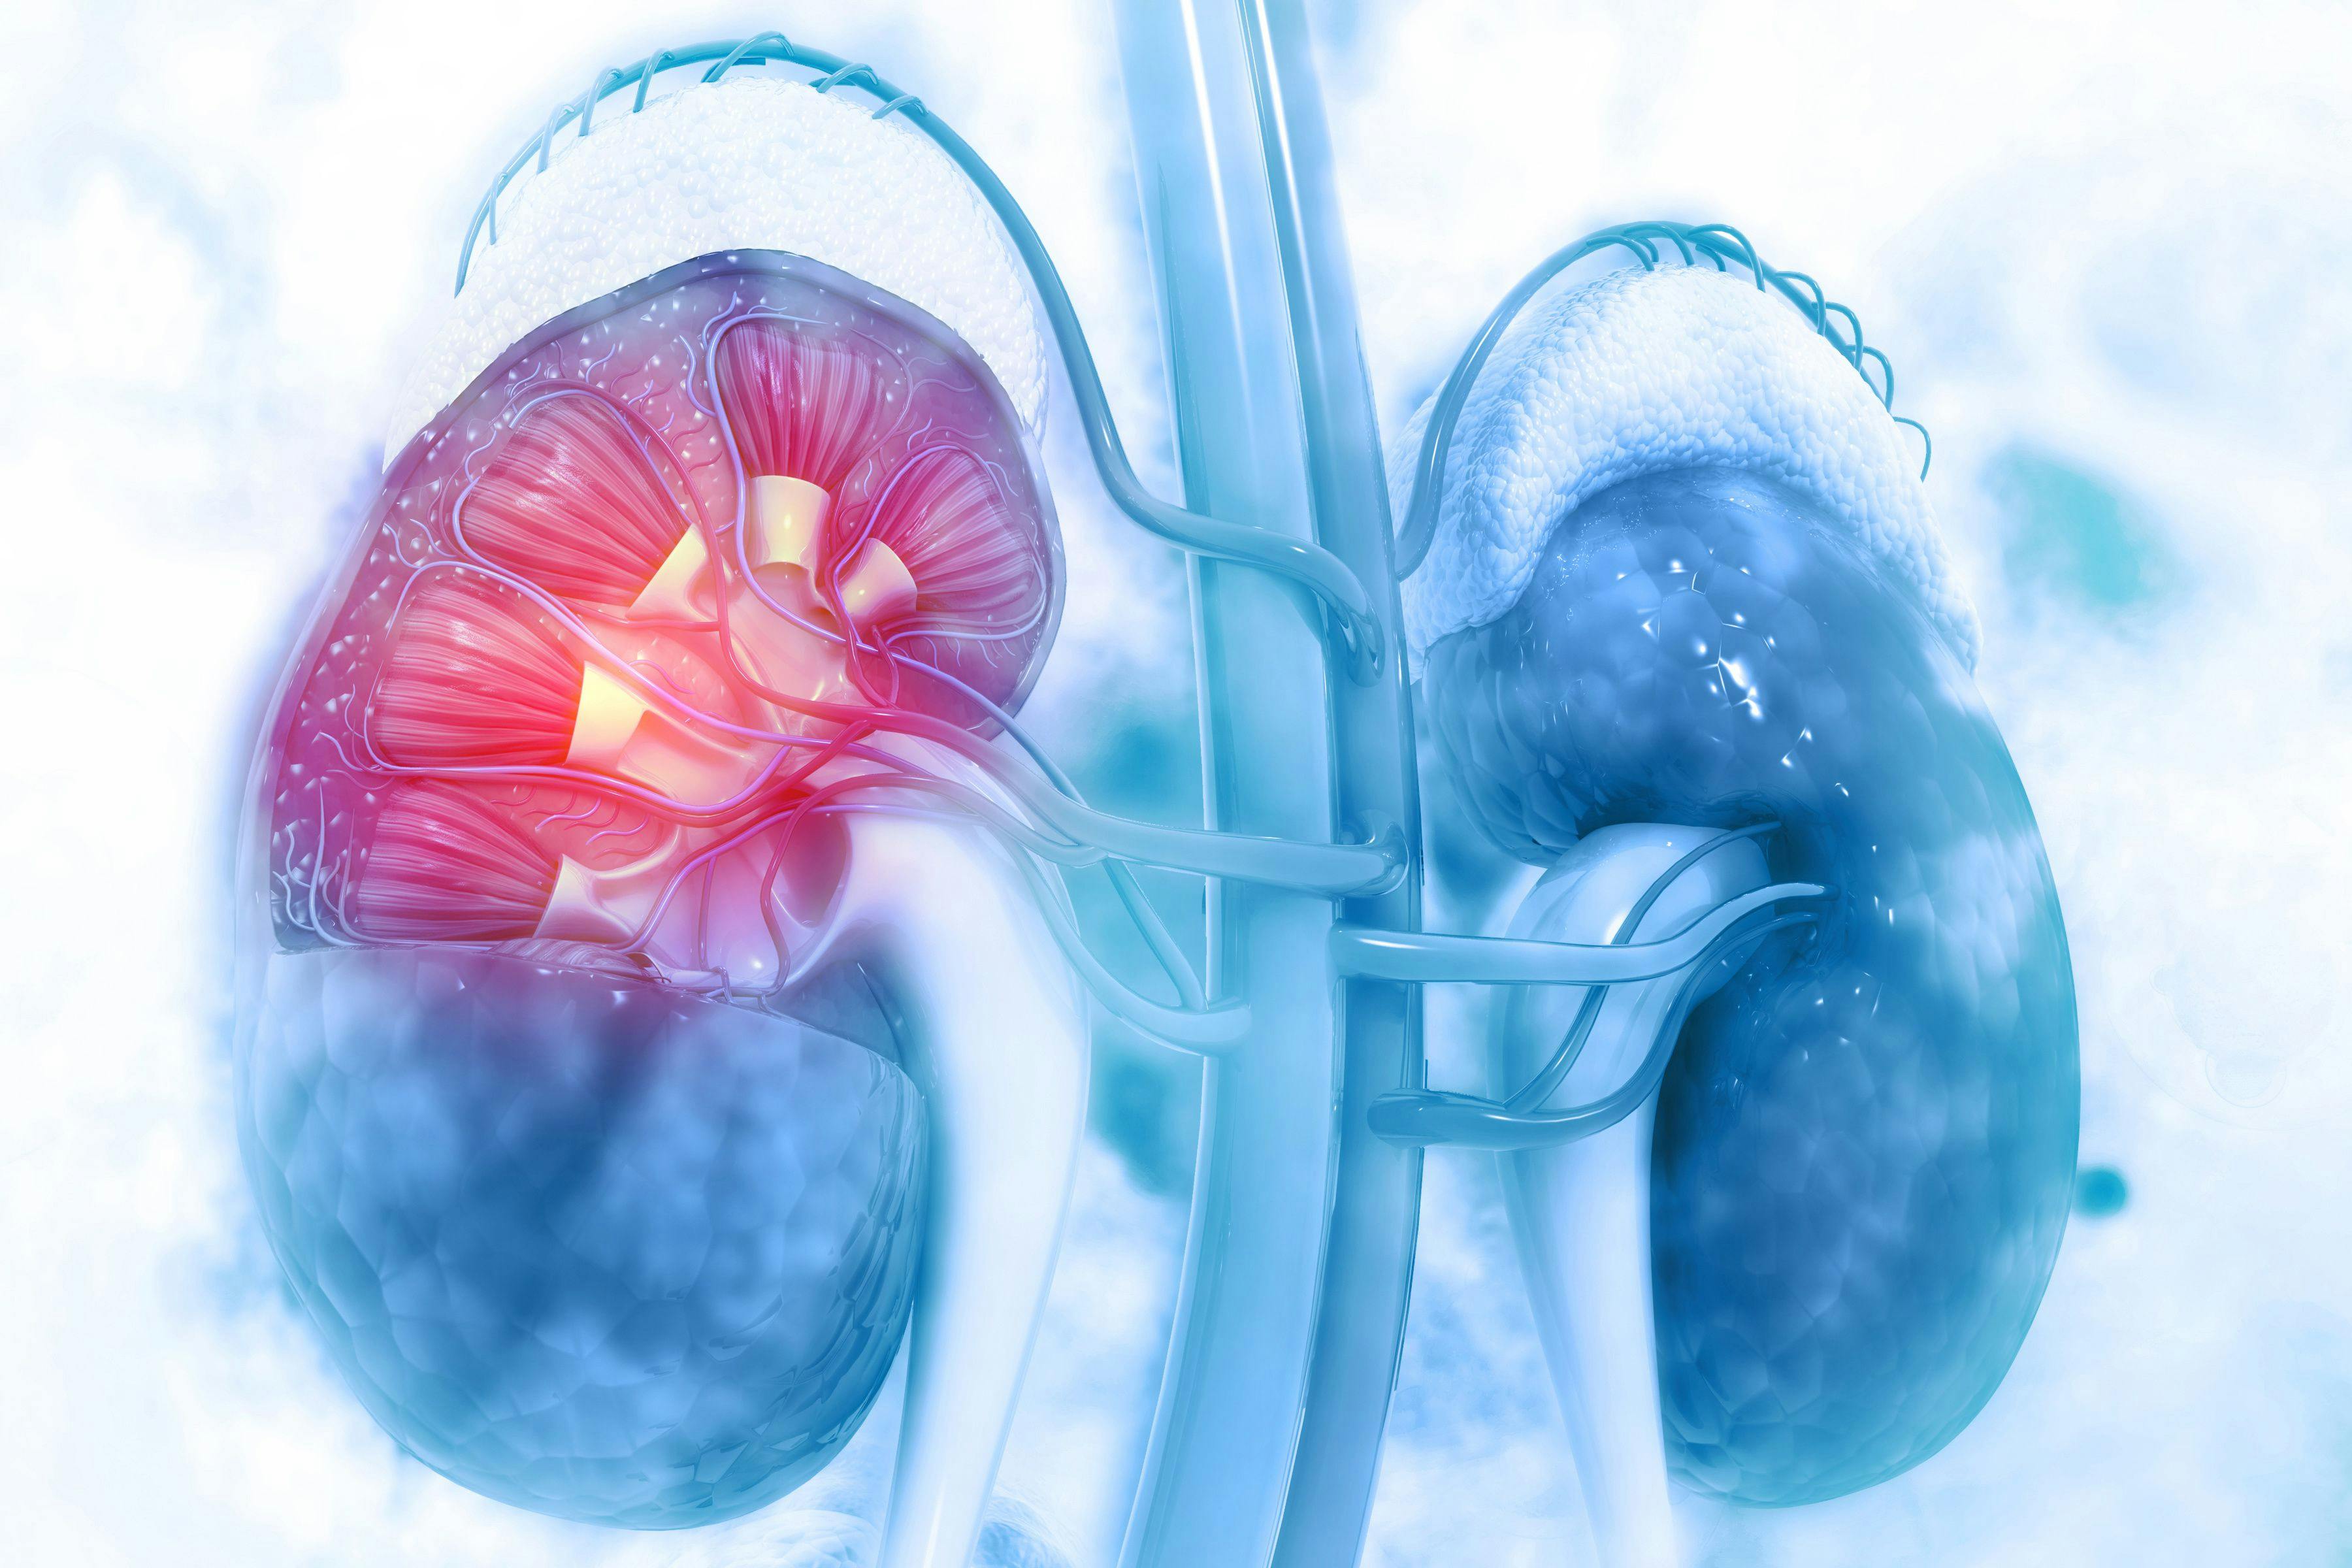 Fotivda Boosts Survival and Has ‘Interesting’ – and Tolerable – Safety Profile for Kidney Cancer Treatment